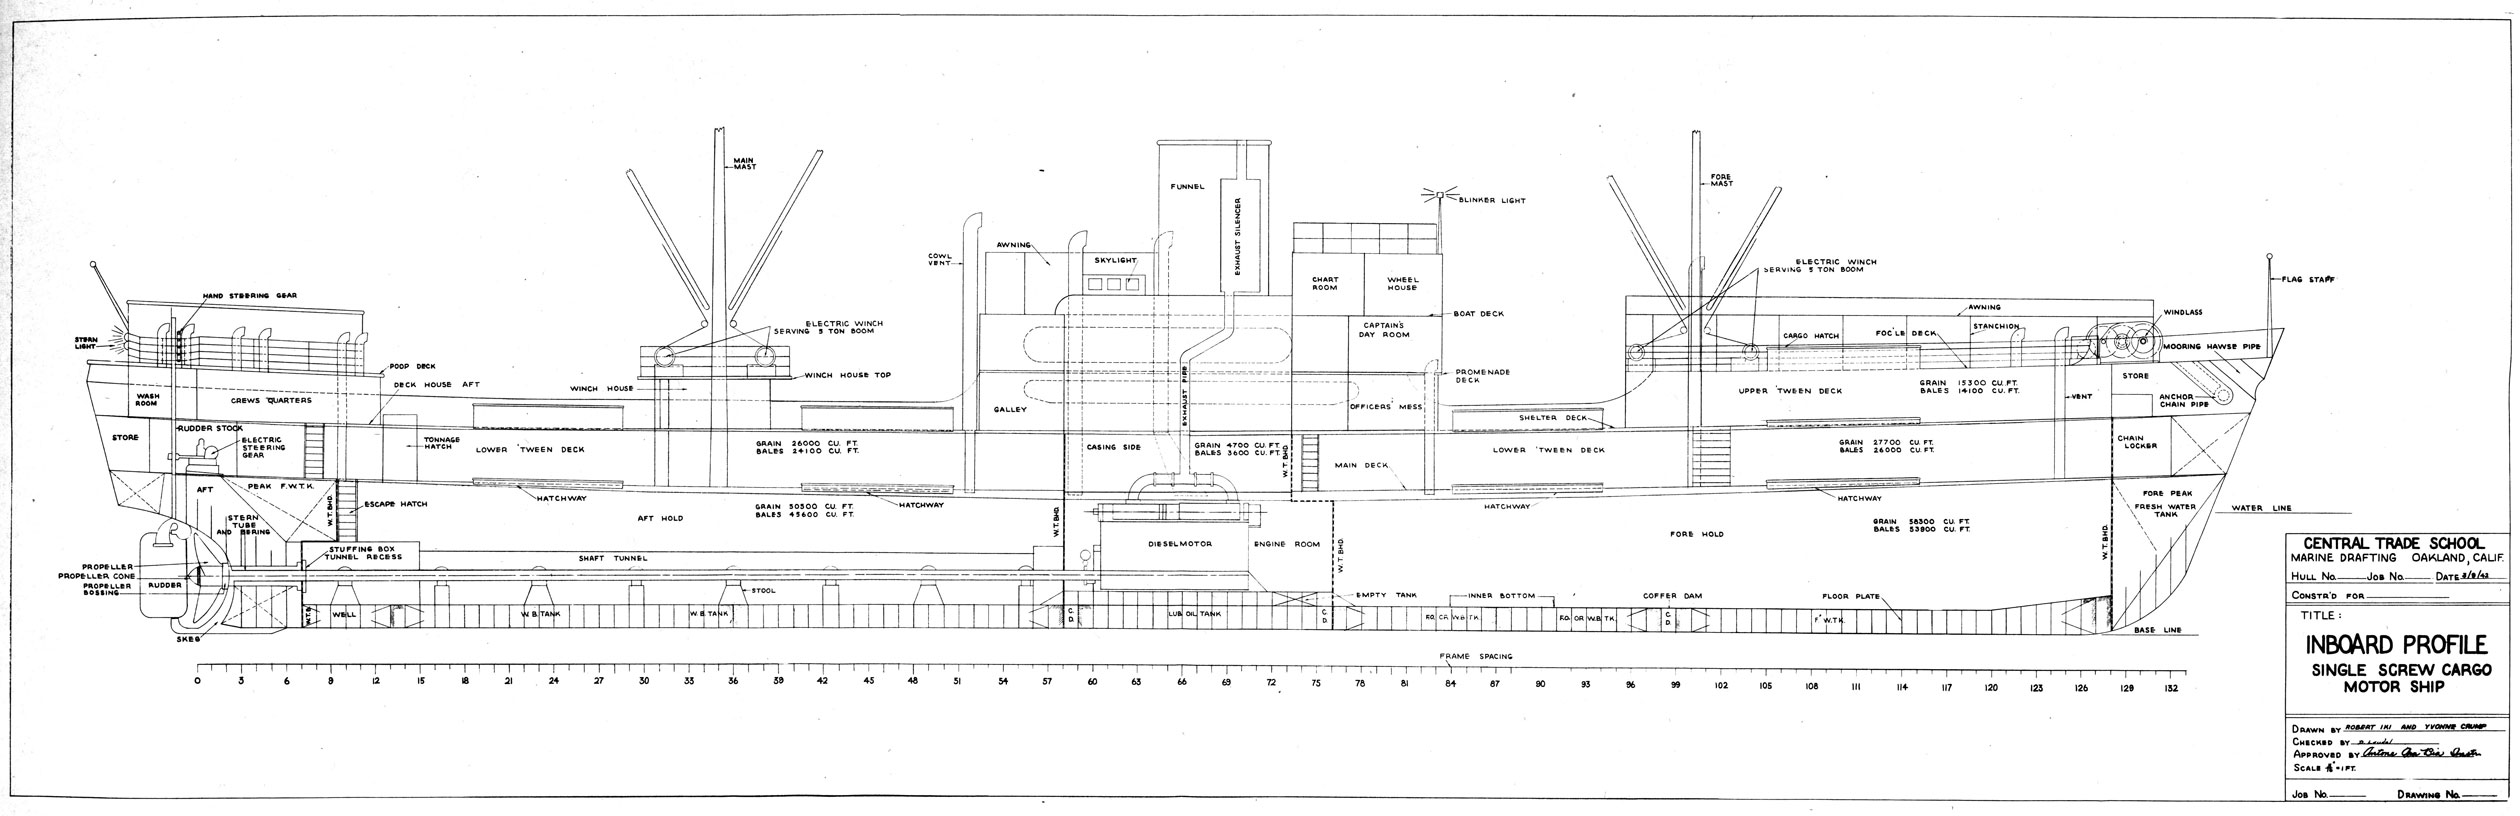 CENTRAL TRADE SCHOOL
MARINE DRAFTING - OAKLAND CALIF.
CONSTR'D FOR -
HULL No. - Job. No. - DATE 3/9/42
TITLE
INBOARD PROFILE
SINGLE SCREW CARGO
MOTOR SHIP
DRAWN BY ROBERT IKI AND YVONNE CRUMP.
CHECKED BY D. LAUDEL
APPROVED BY Antone Ana Bia Instr.
SCALE 3/16 inch = 1 FT.
Joe No - DRAWING No. -
